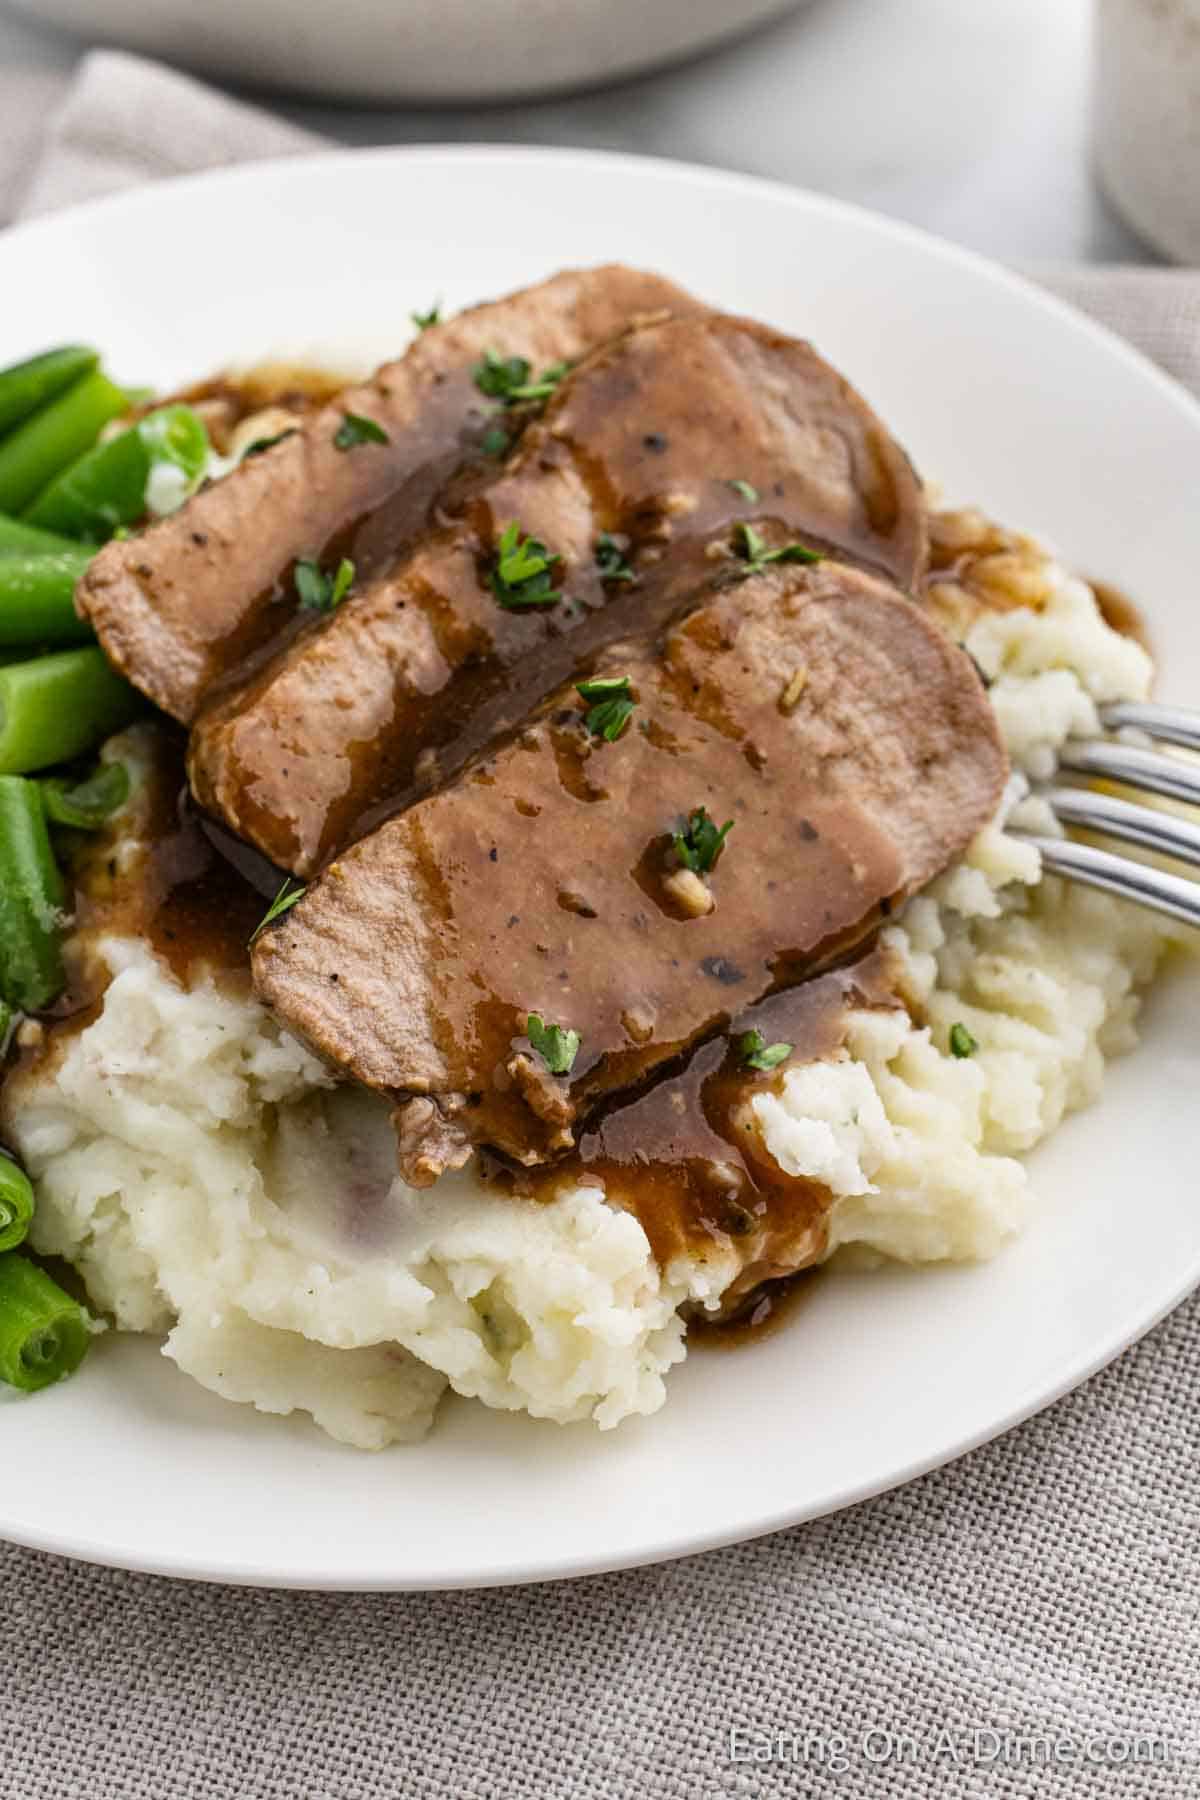 Slice pork tenderloin topped with a glaze over mashed potatoes and green beans on a plate